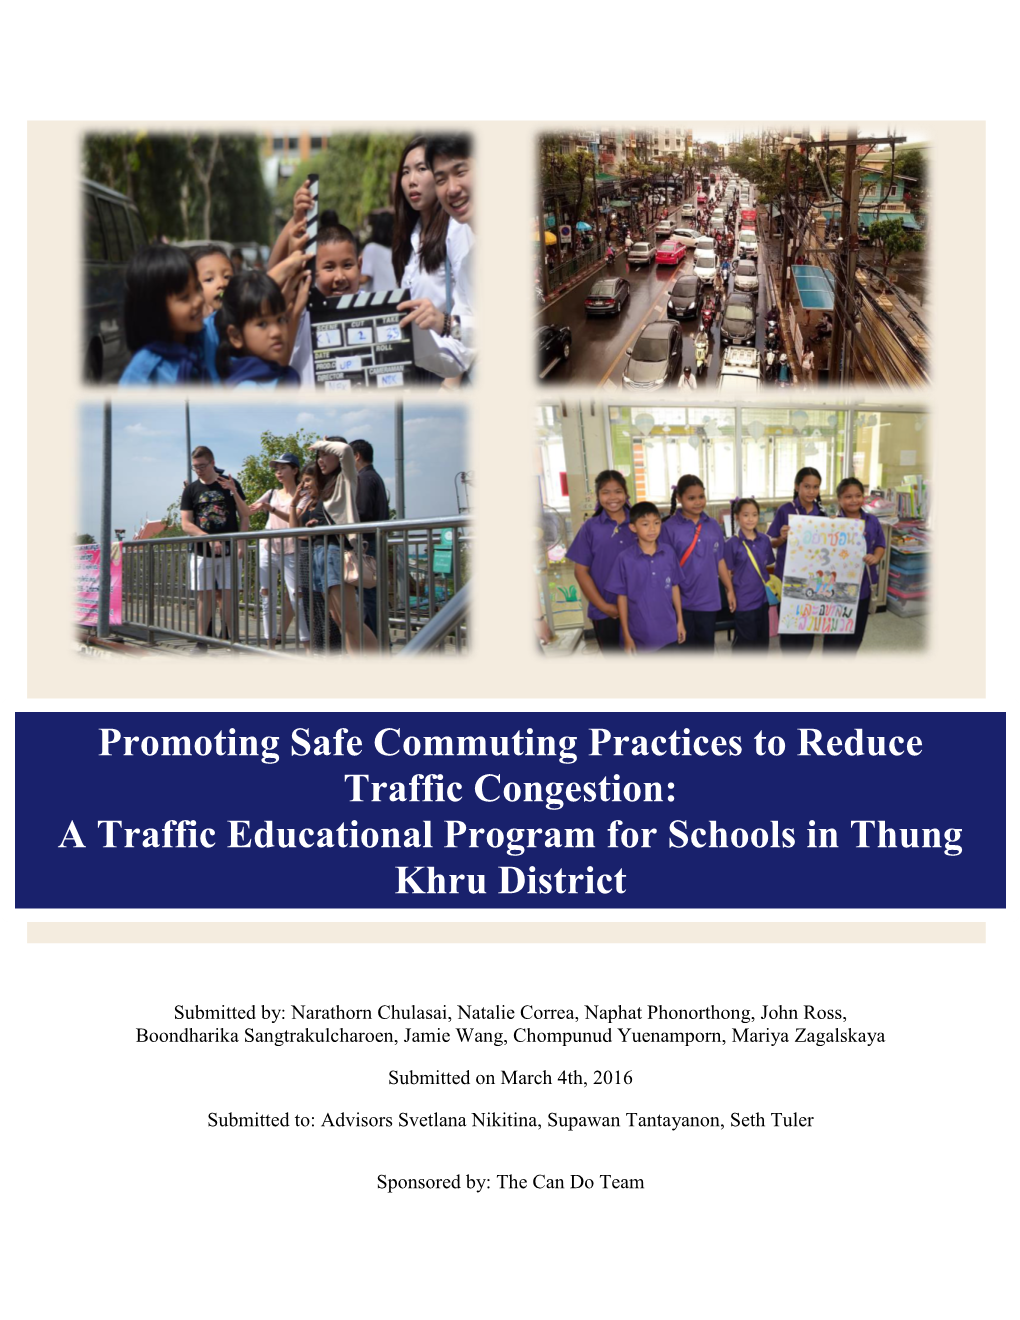 A Traffic Educational Program for Schools in Thung Khru District